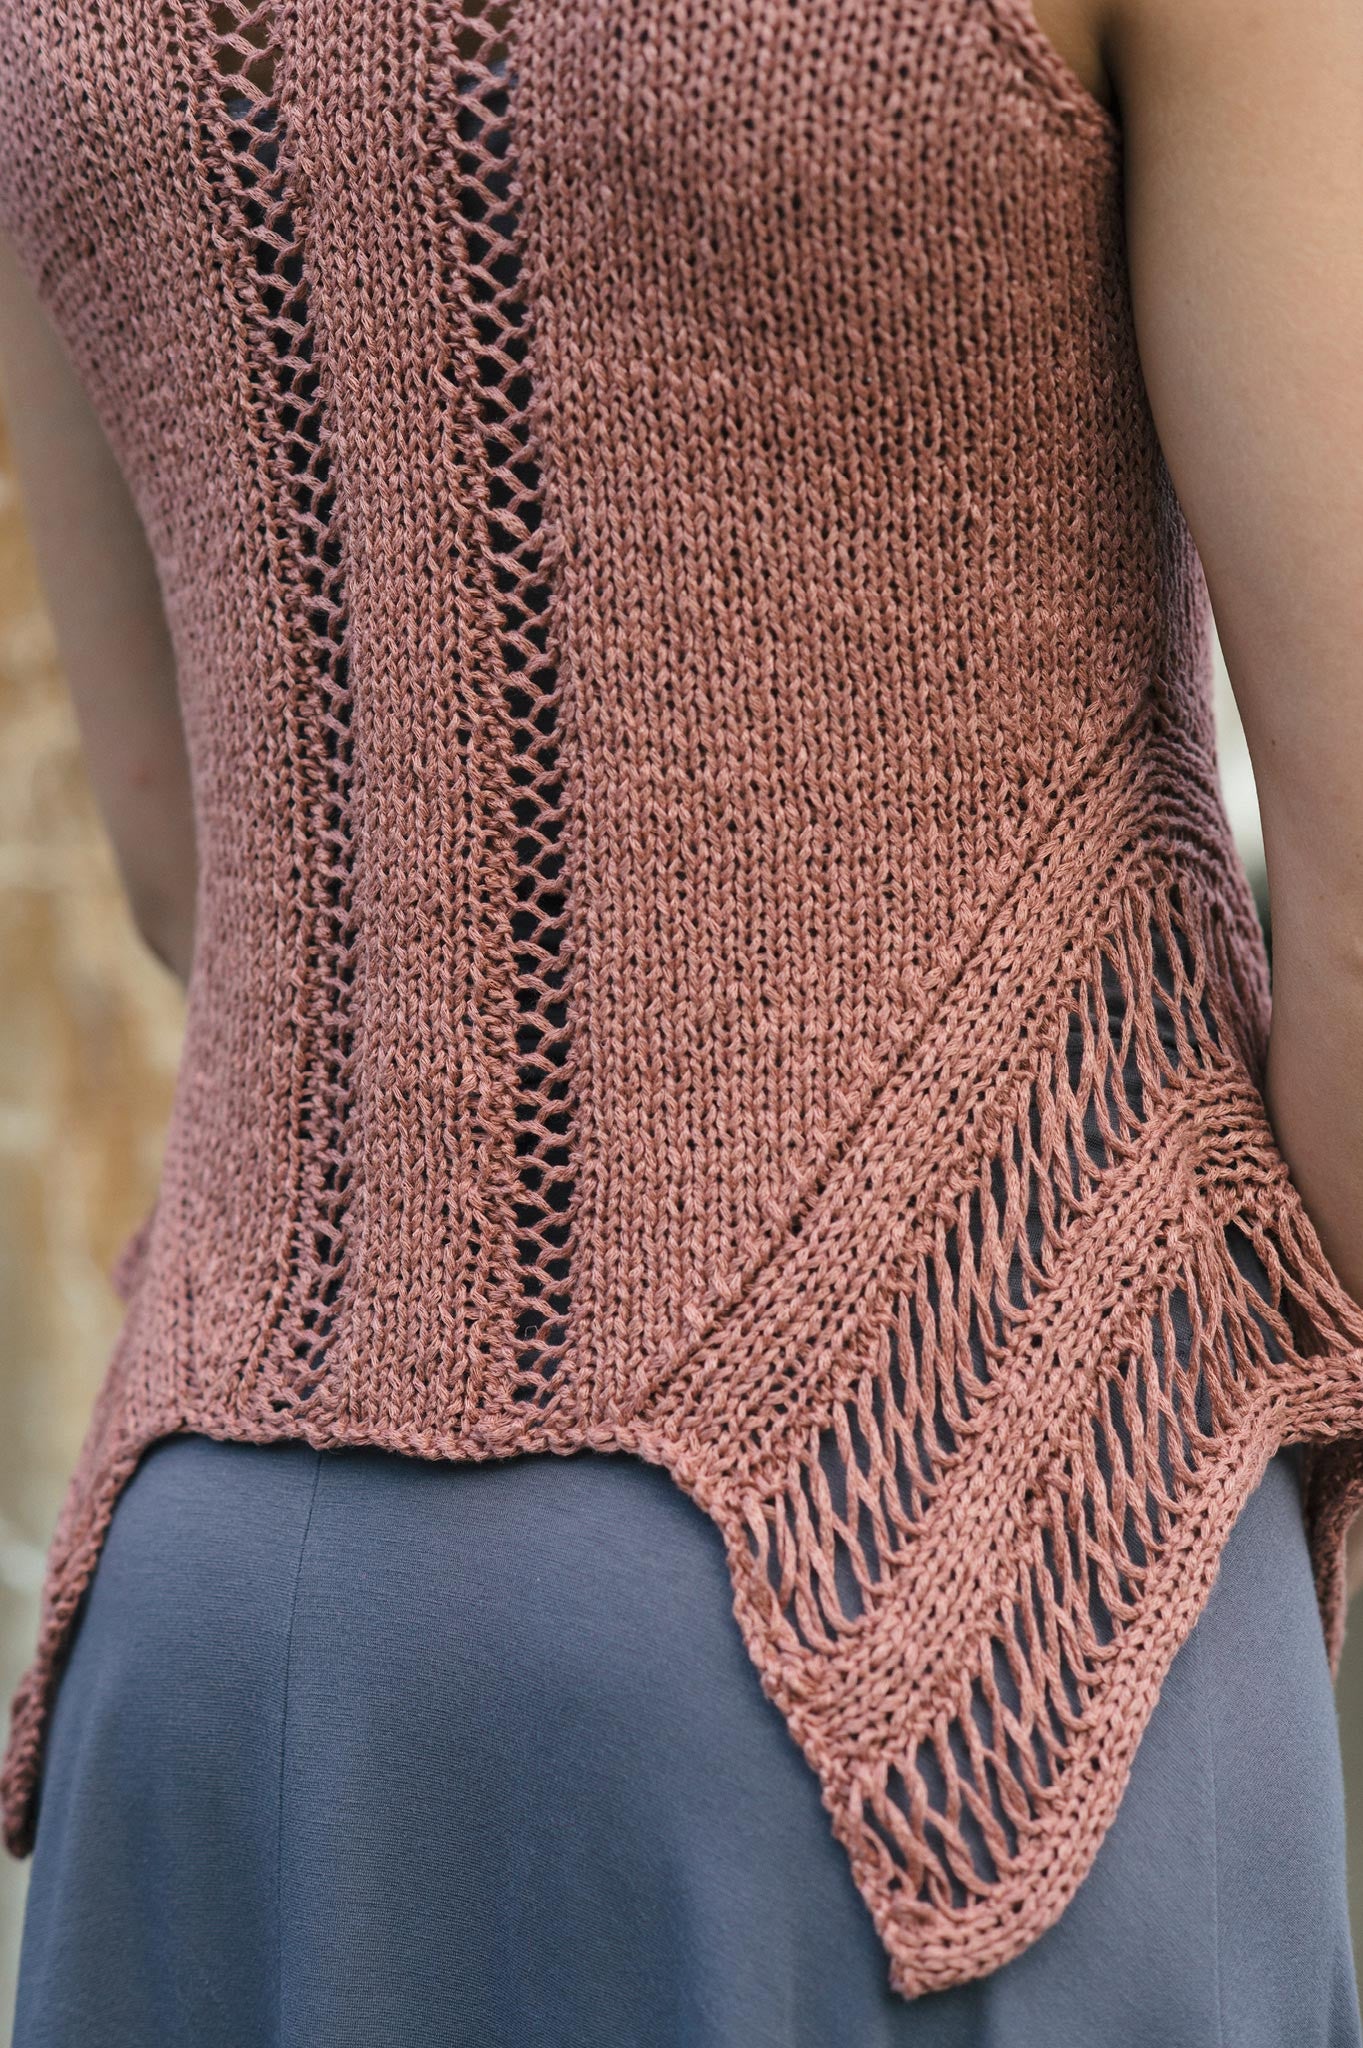 annex tank knitting pattern – Quince & Co.